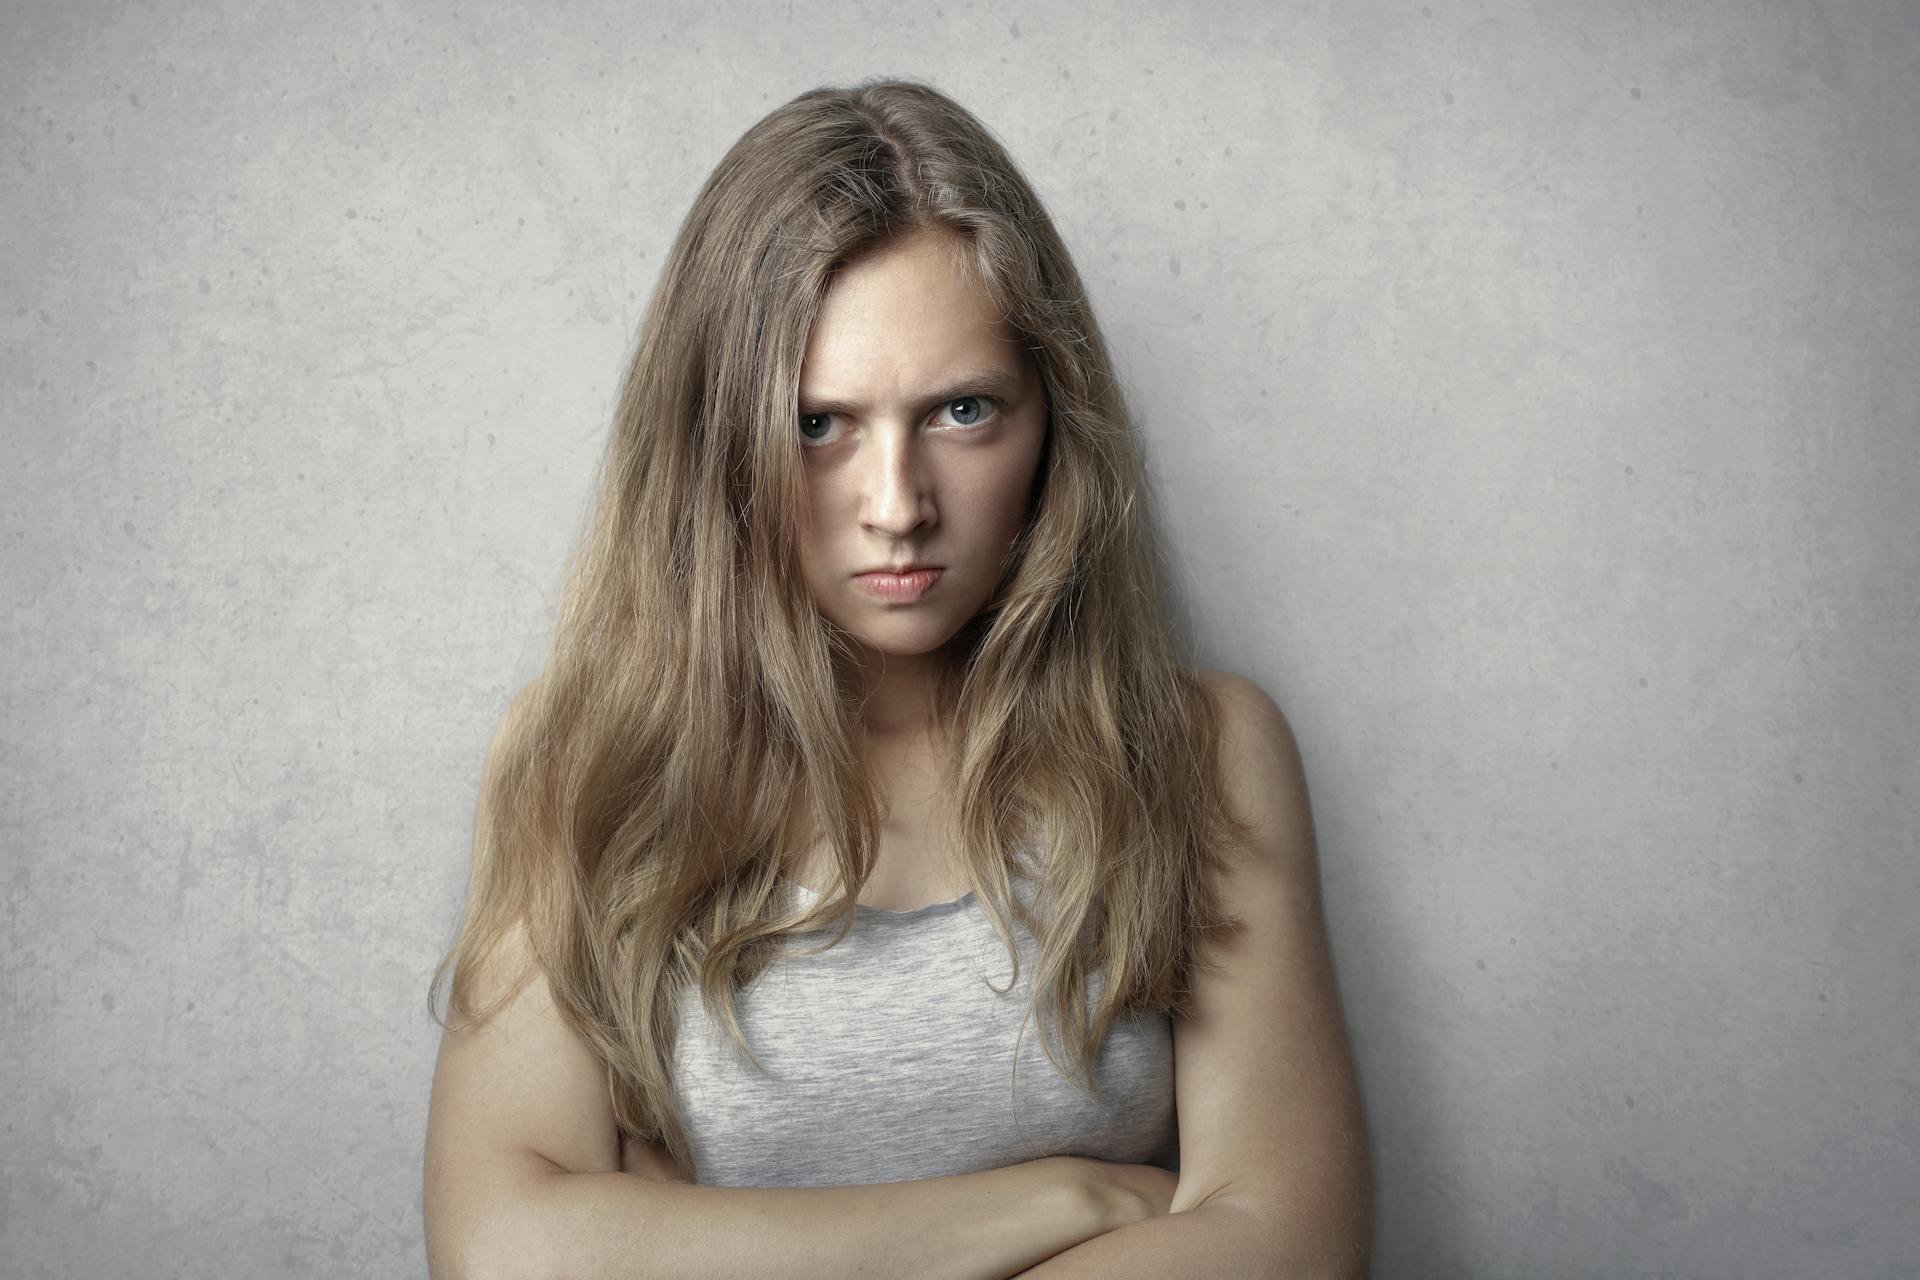 An angry young woman standing with her arms crossed | Source: Pexels